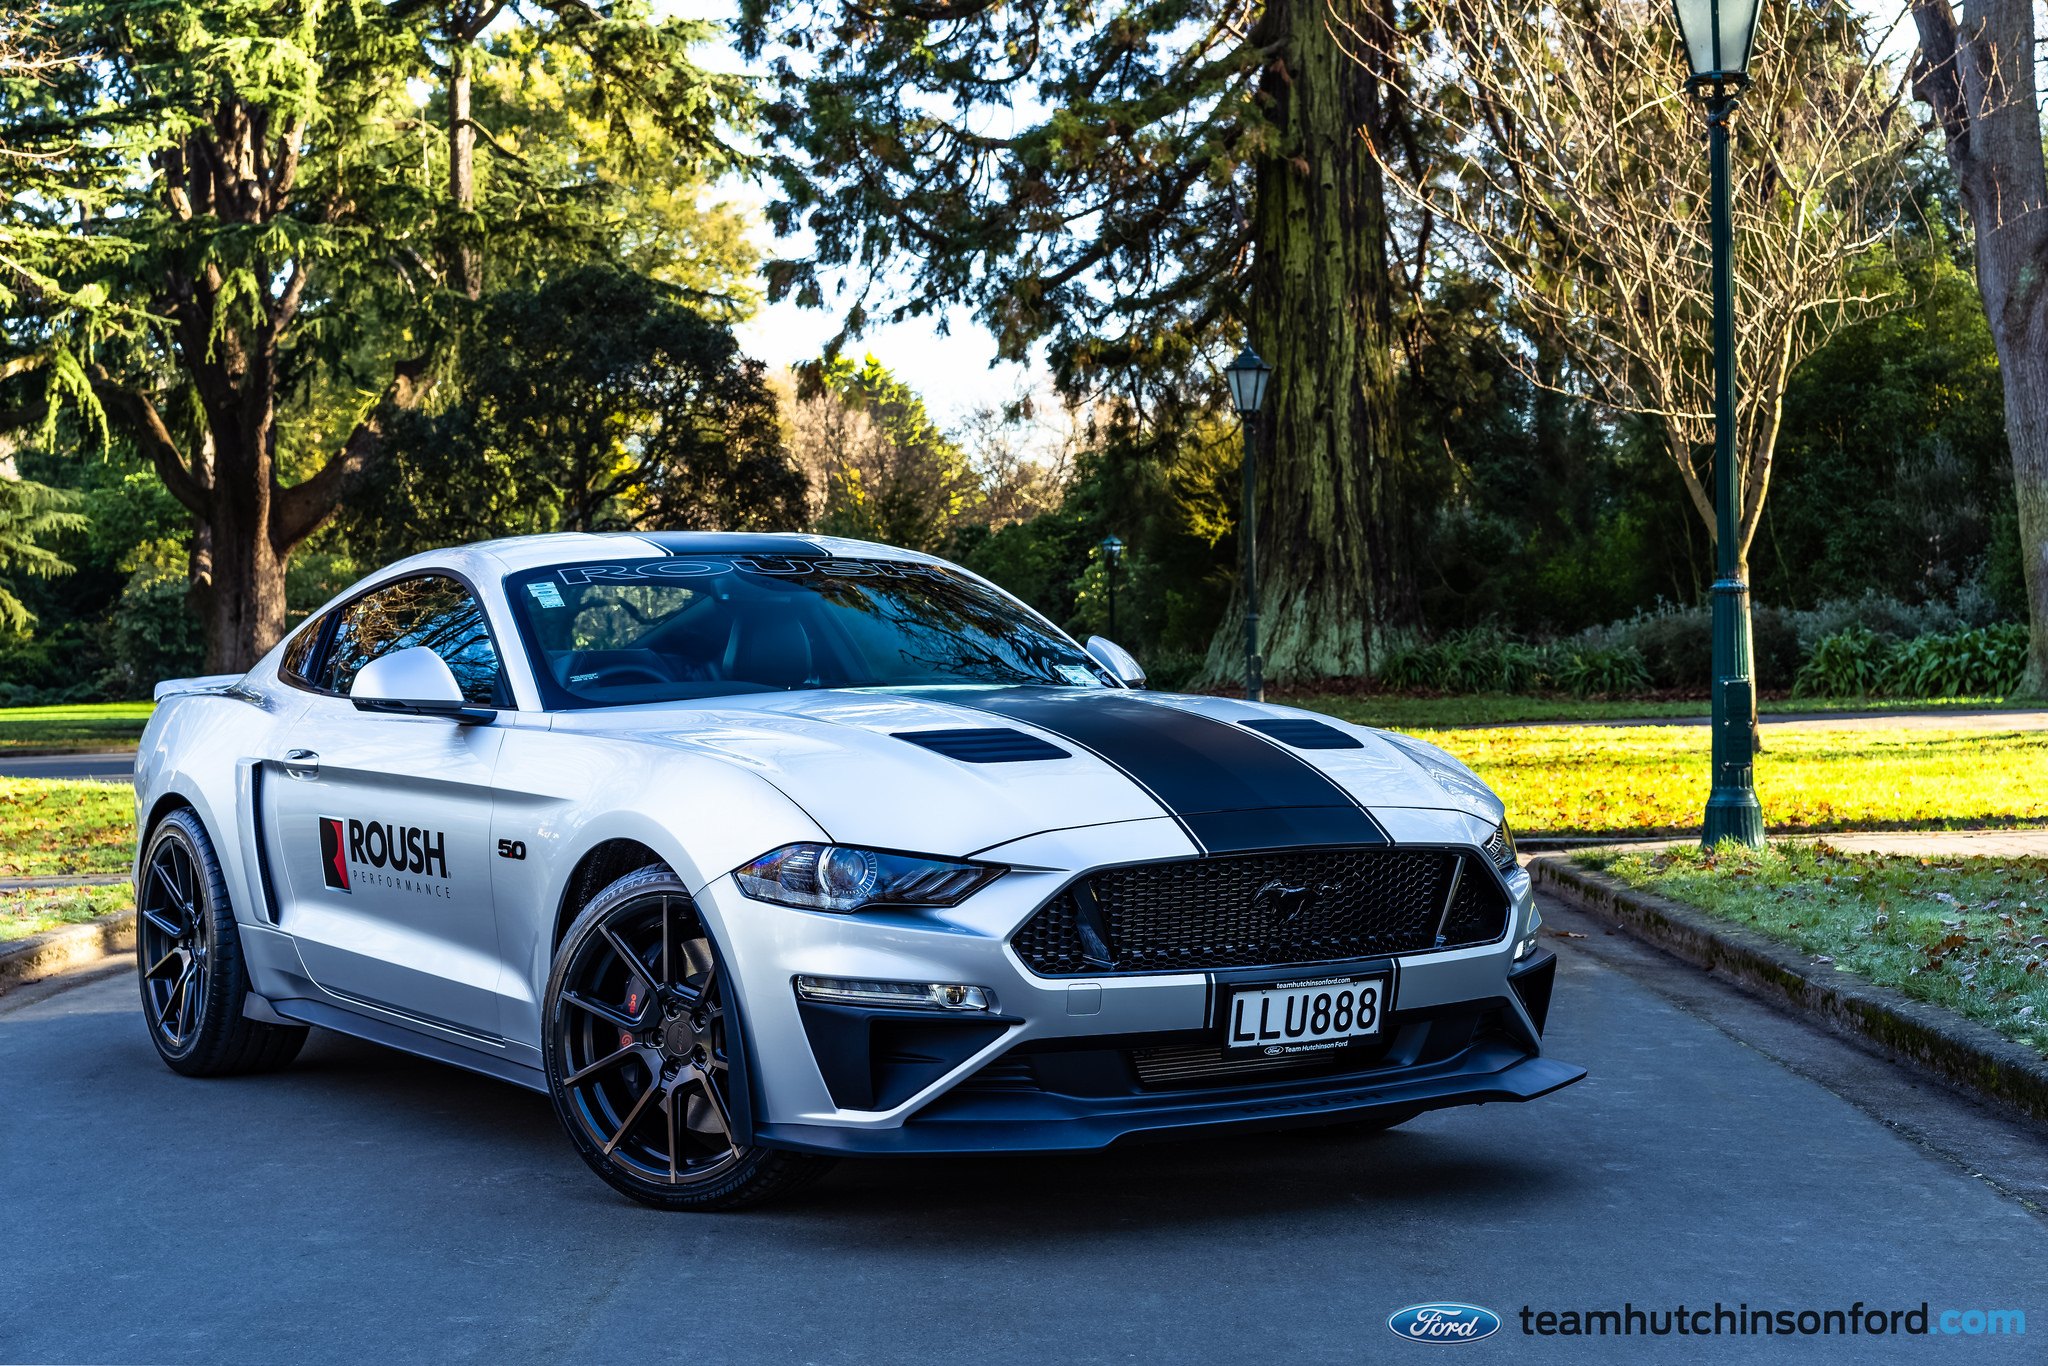 Roush Performance Body Kit on White Ford Mustang 5.0 - Photo by TSW Wheels